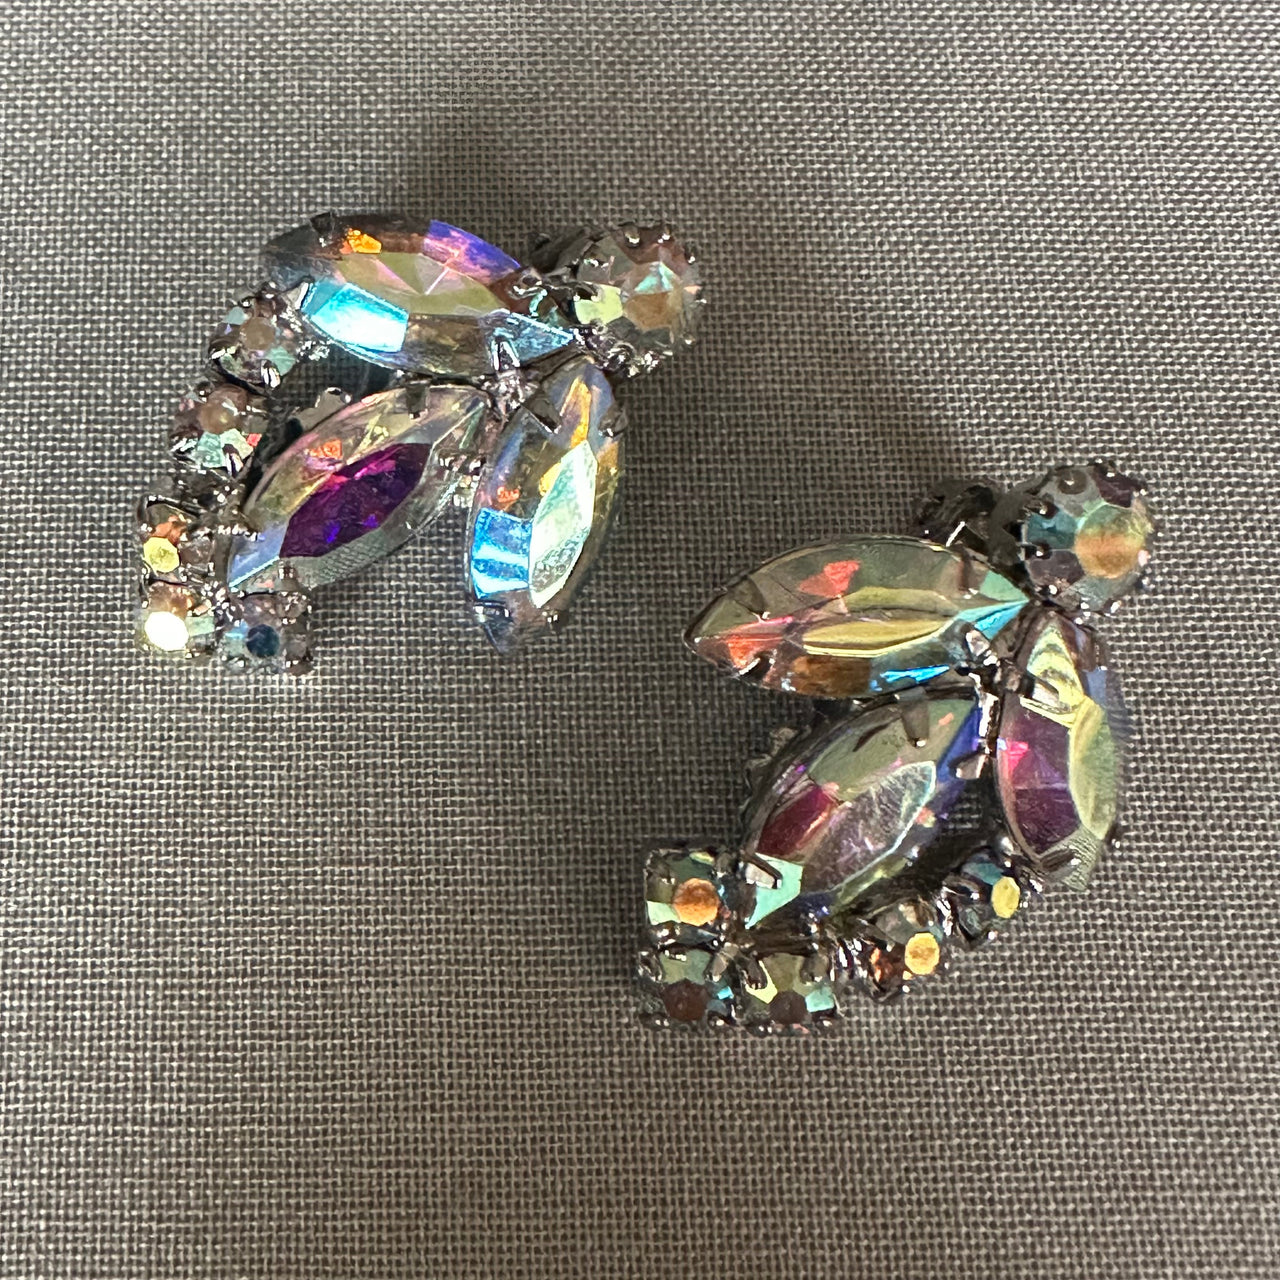 1960s Aurora Borealis Clip Earrings Bloomers and Frocks 